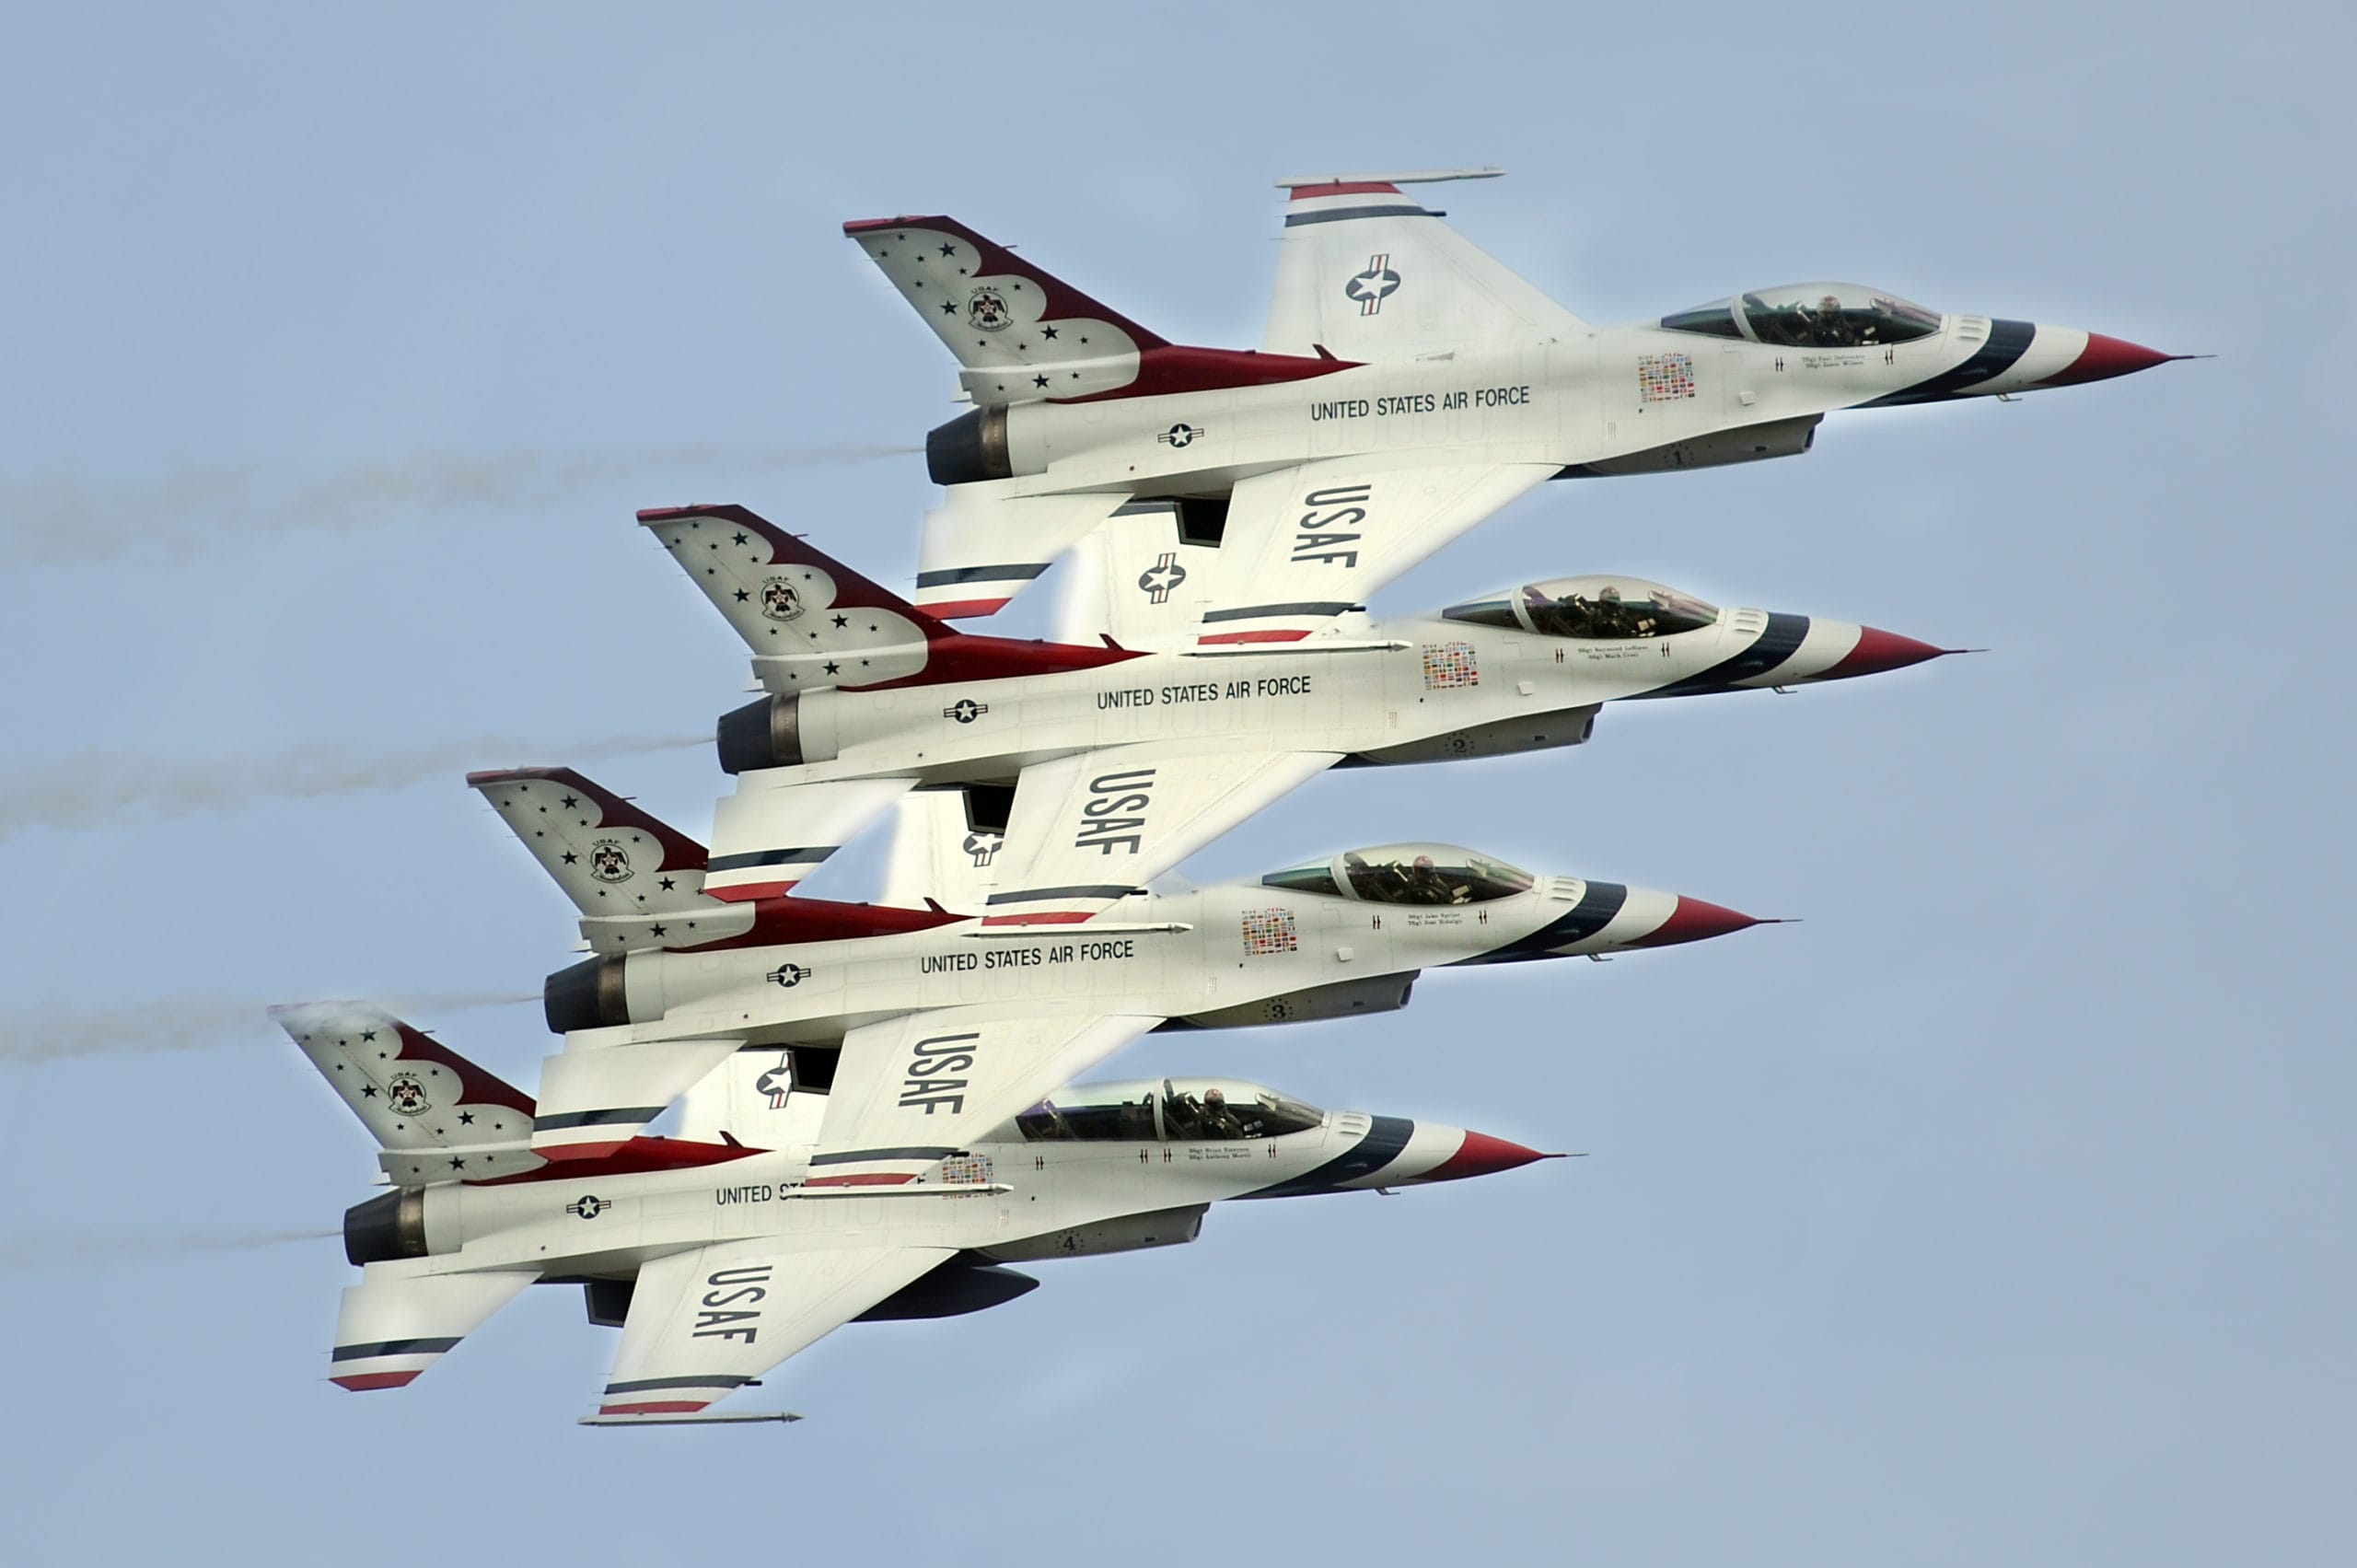 United Air Force Thunderbirds To Headline 19th Annual Bethpage Air Show At Jones Beach Taking Place May 27-28, 2023